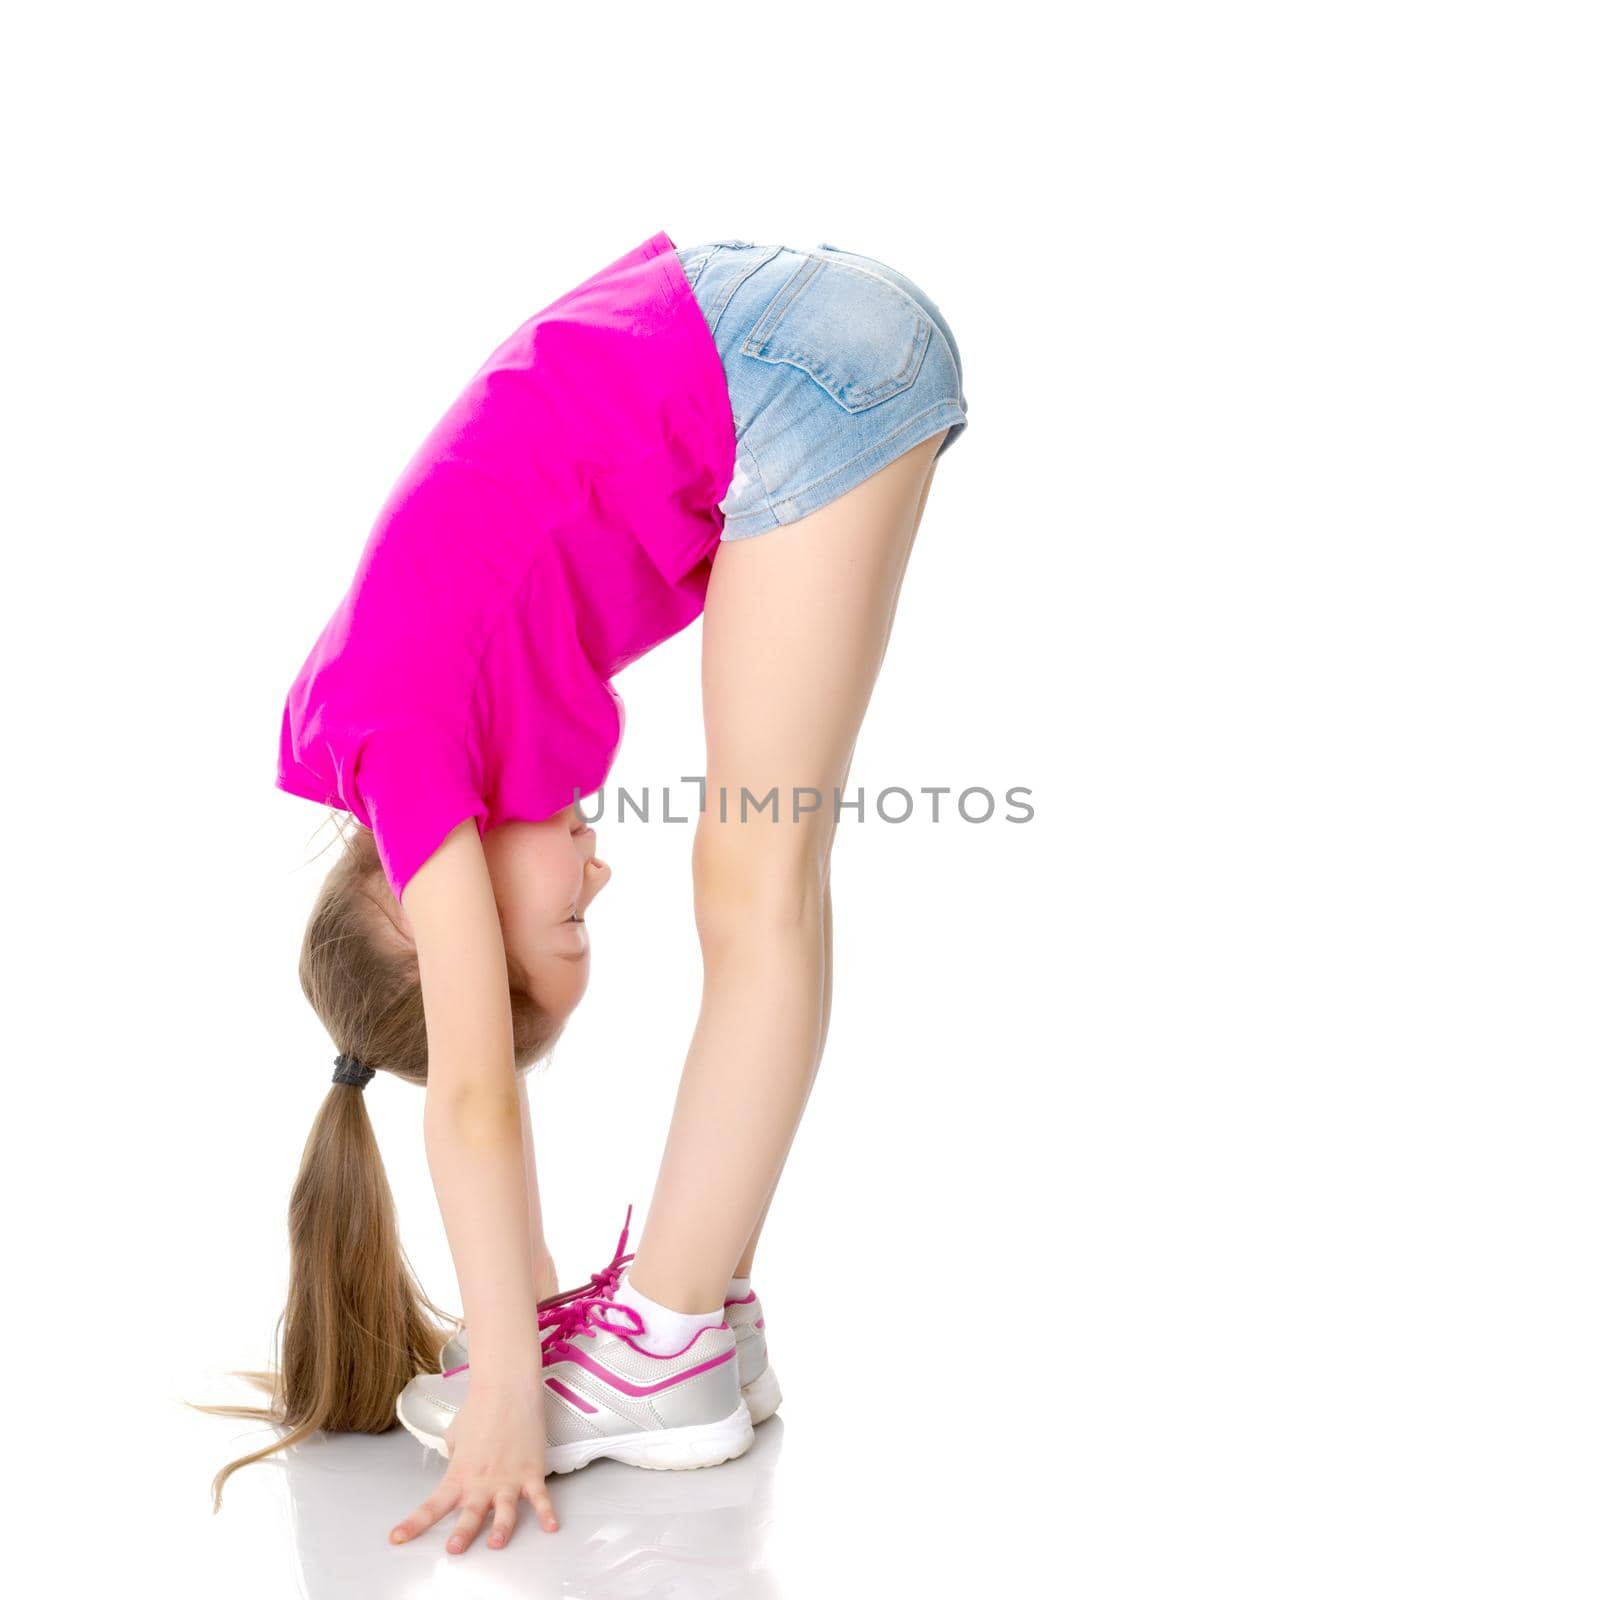 A sweet little girl shows gymnastic exercises that she learned at a sports school. The concept of sport and fitness. Isolated on white background.